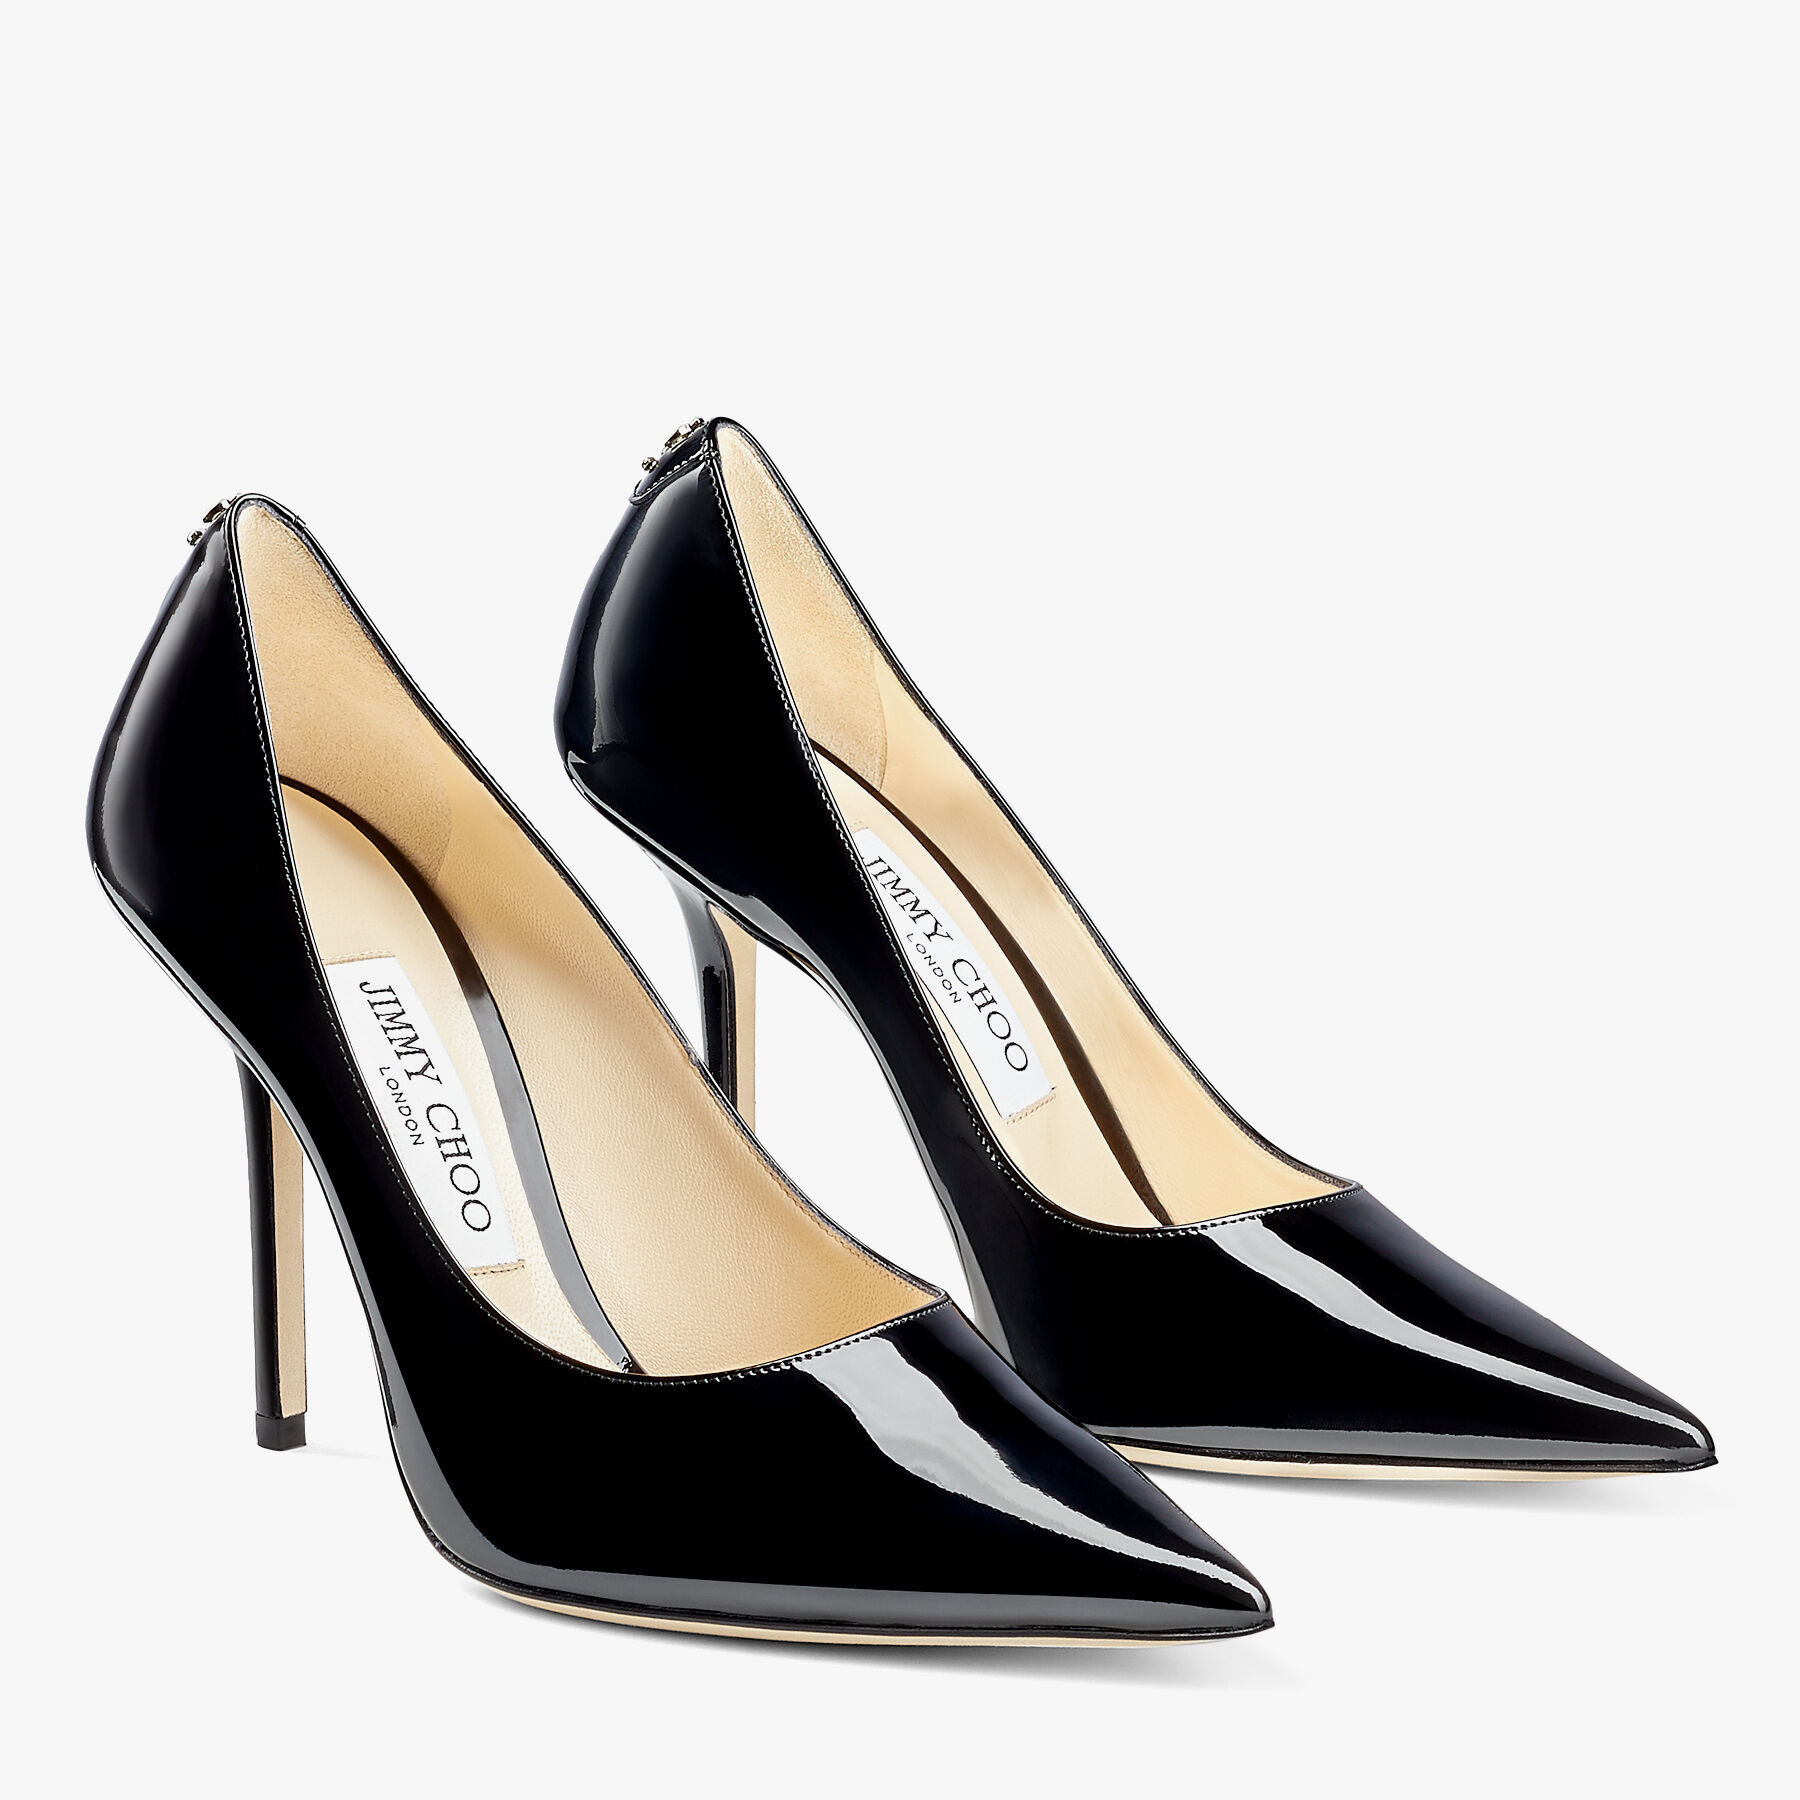 Black Patent Leather Pointed-Toe Pumps with JC Emblem | LOVE 100 